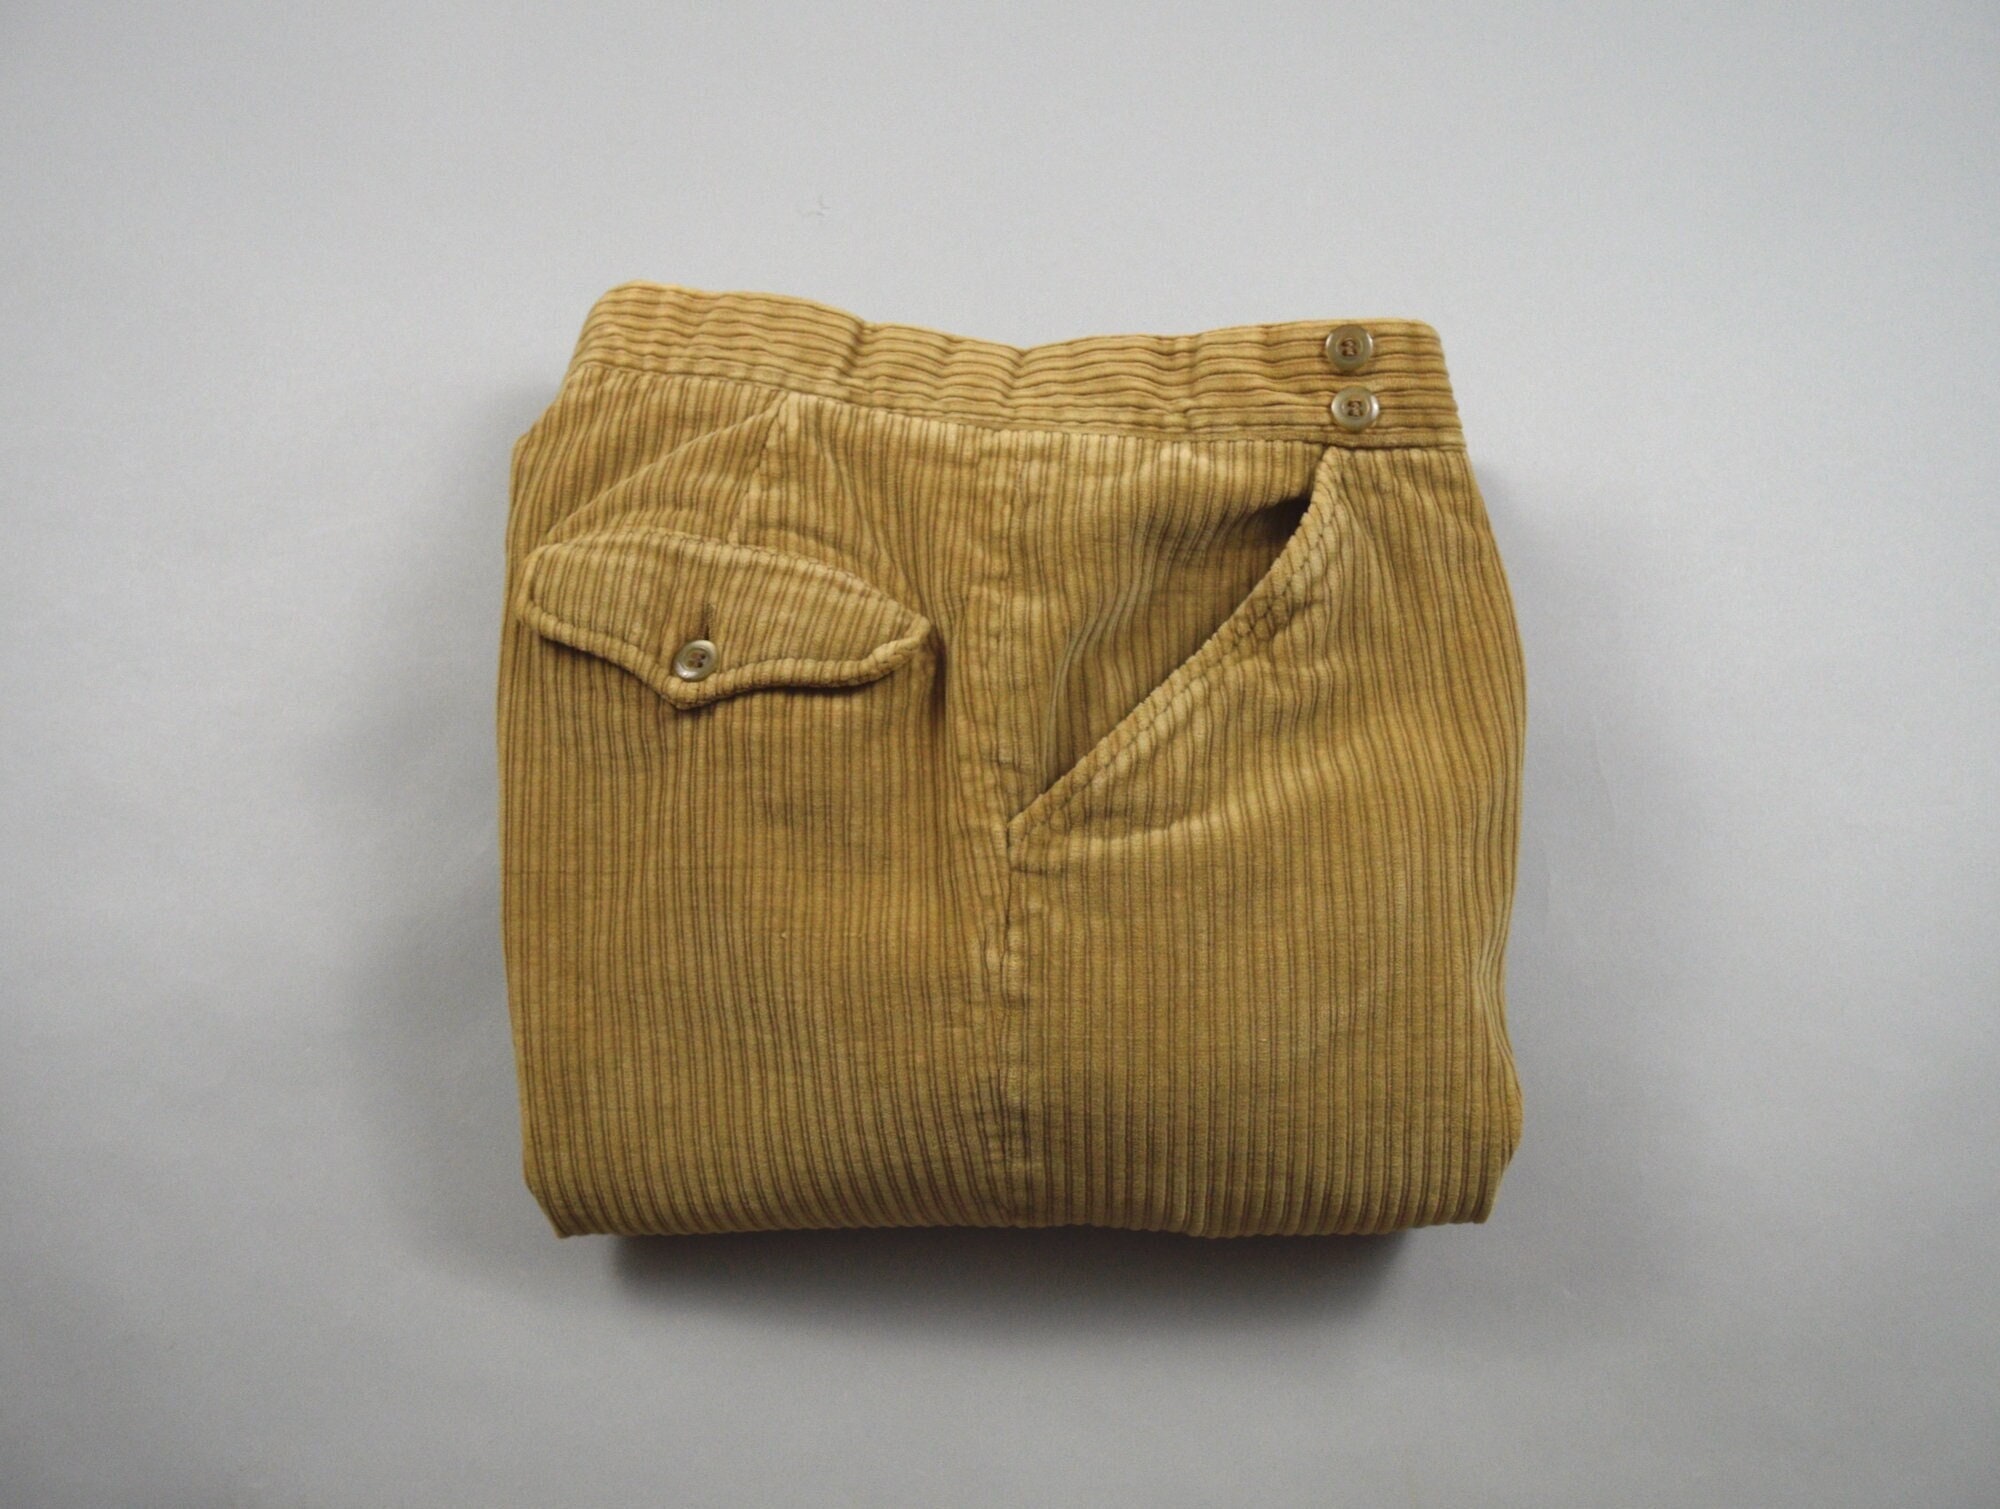 Vintage 100% Cotton 36/30.5 Forest Green Wide Wale Corduroy Pants — Orvis